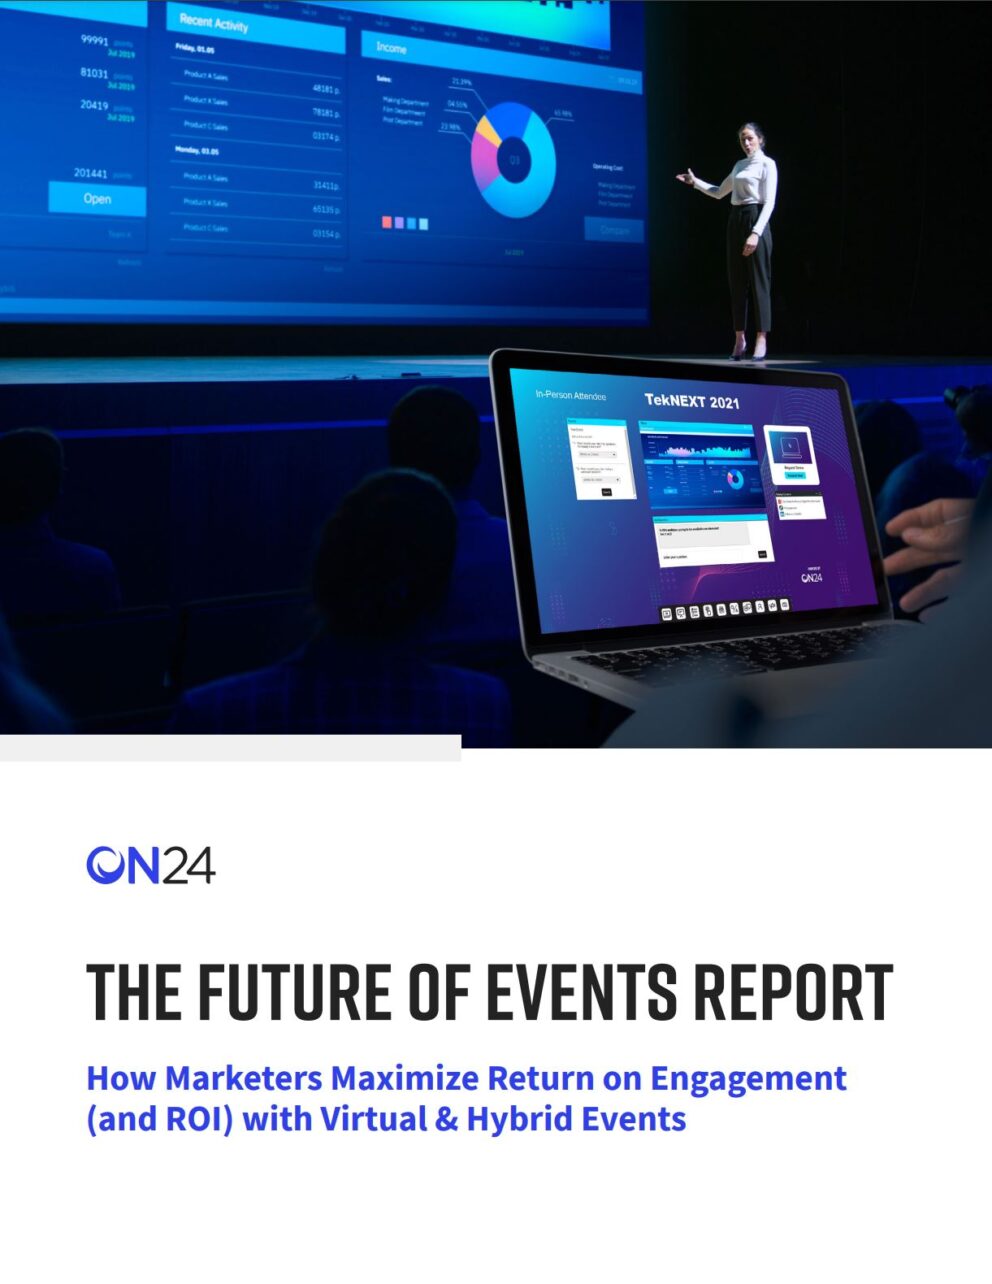 The Future of Events Report